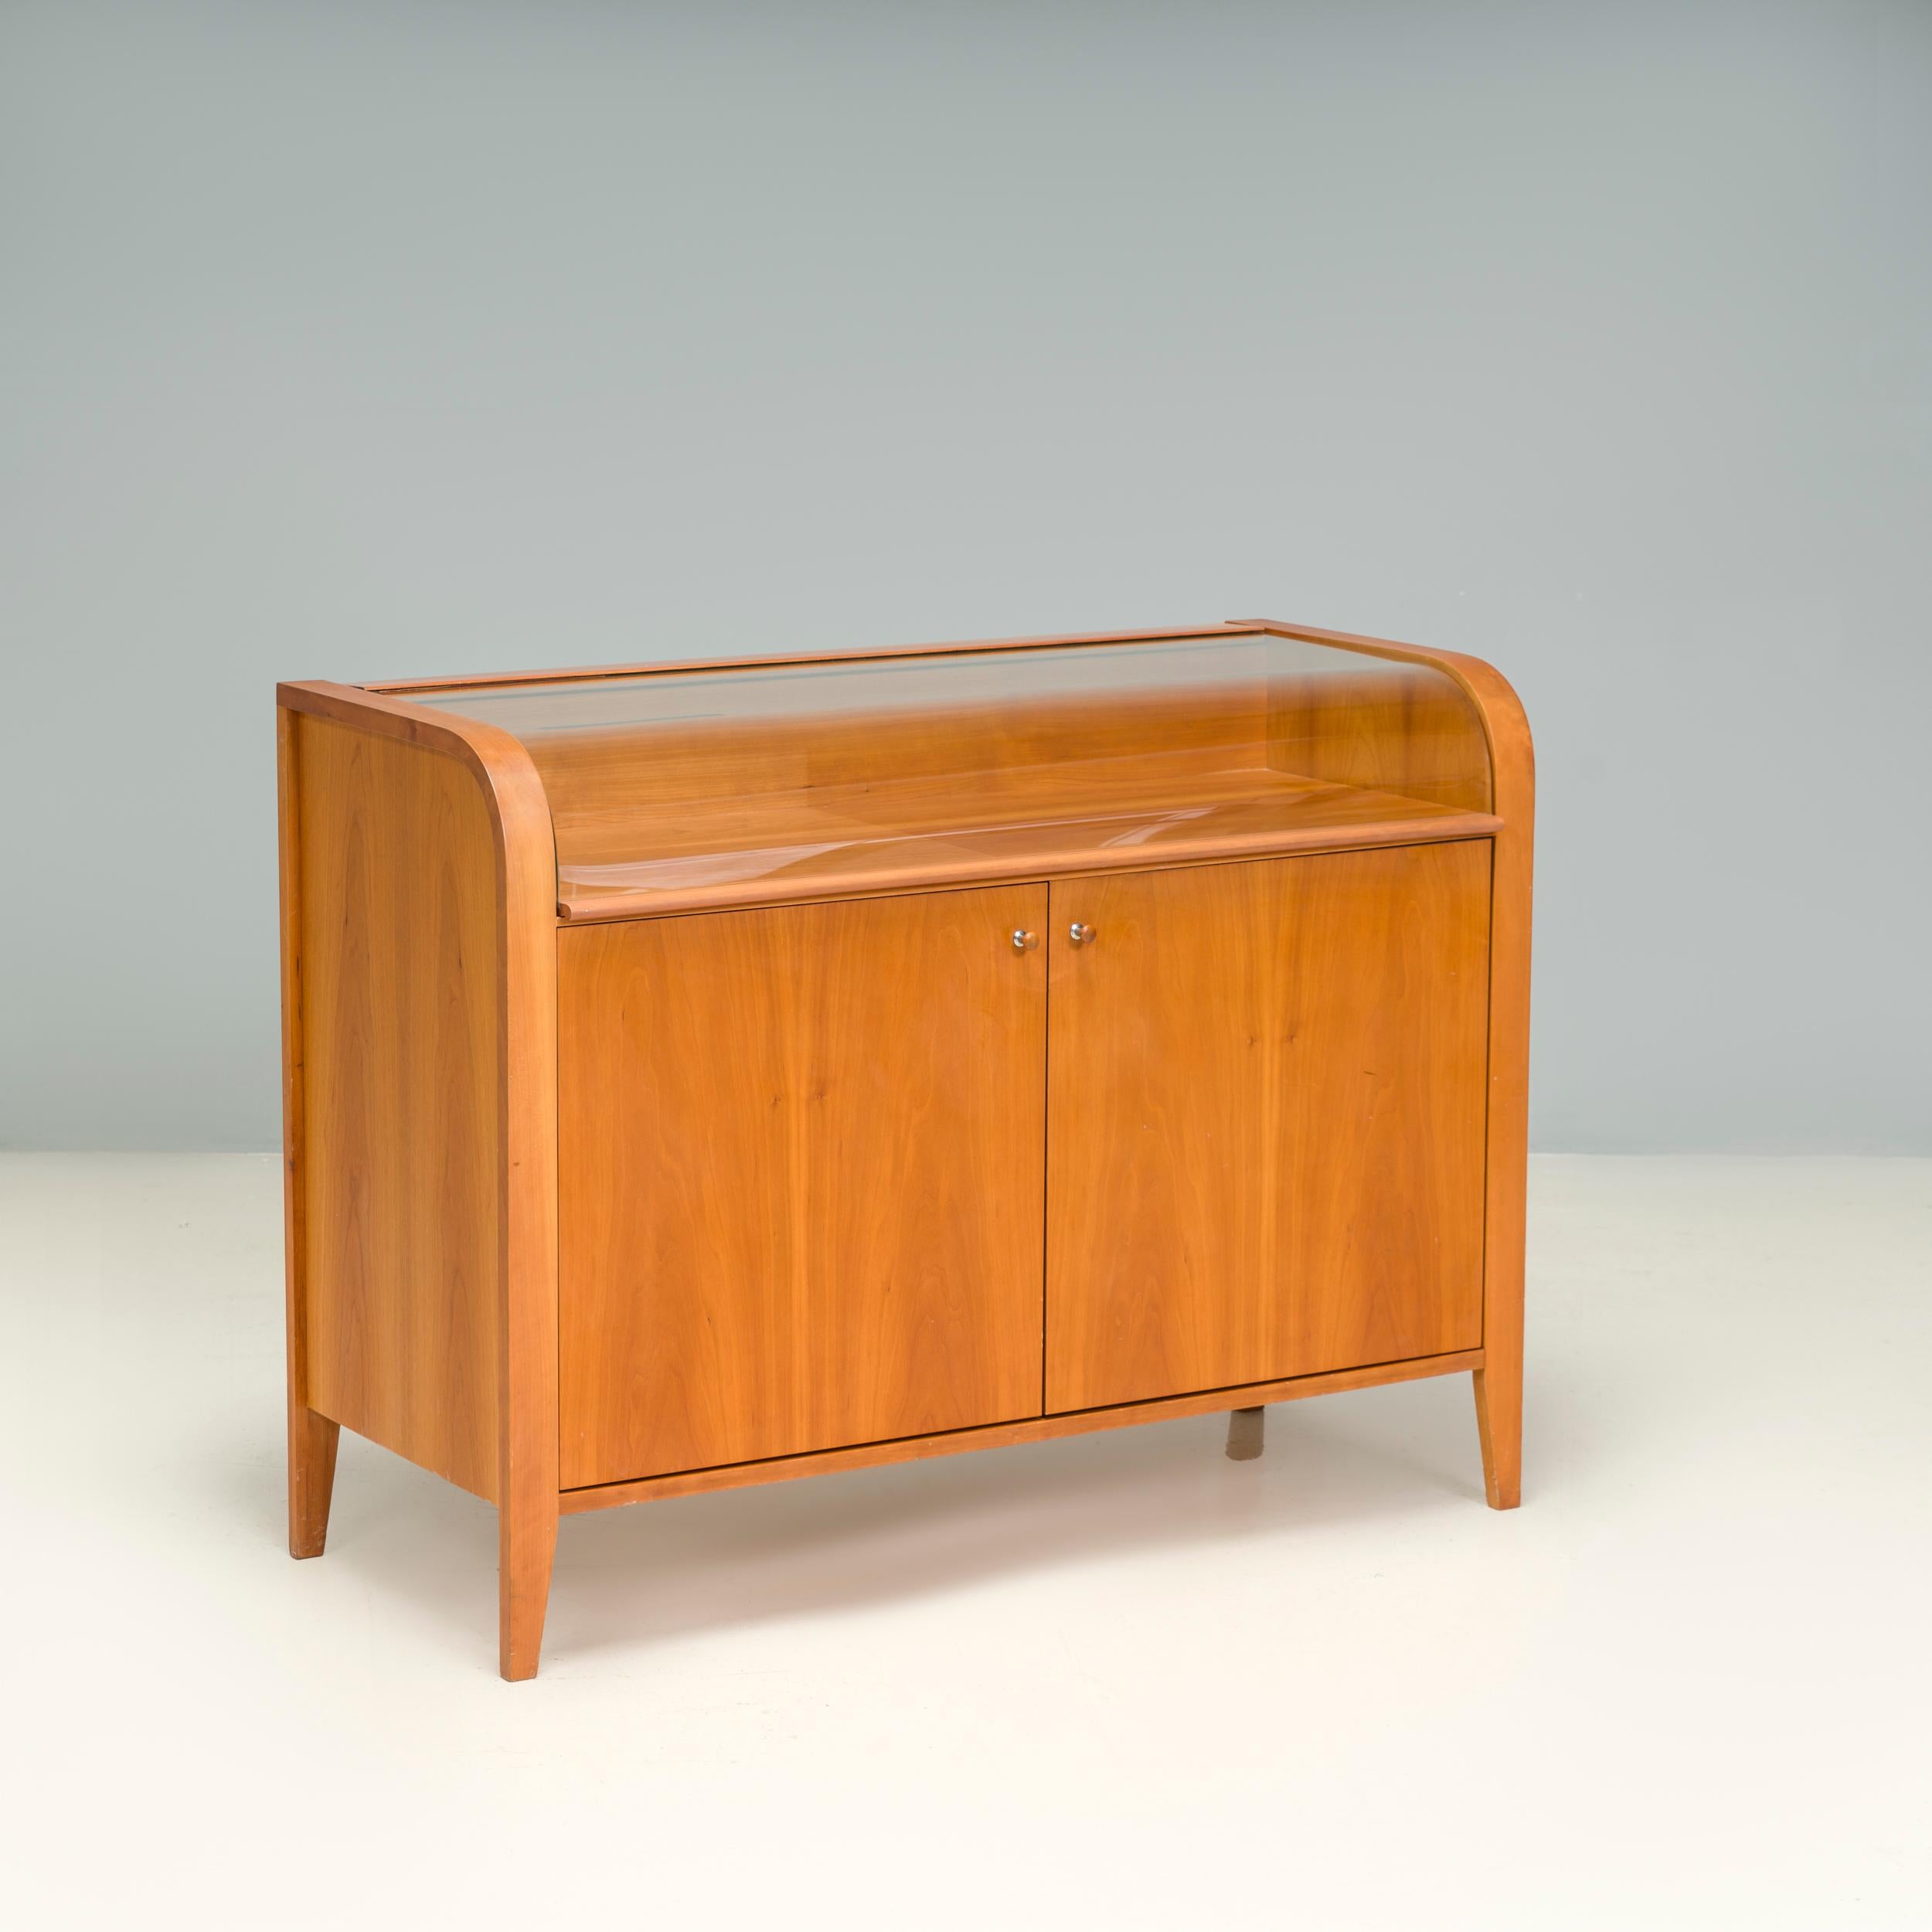 Beautifully constructed by Porada in Italy, this vitrine style sideboard perfectly balances practical storage with room to display treasured objet.

The sideboard is constructed from wood and sits on slimline tapered legs. The front features two